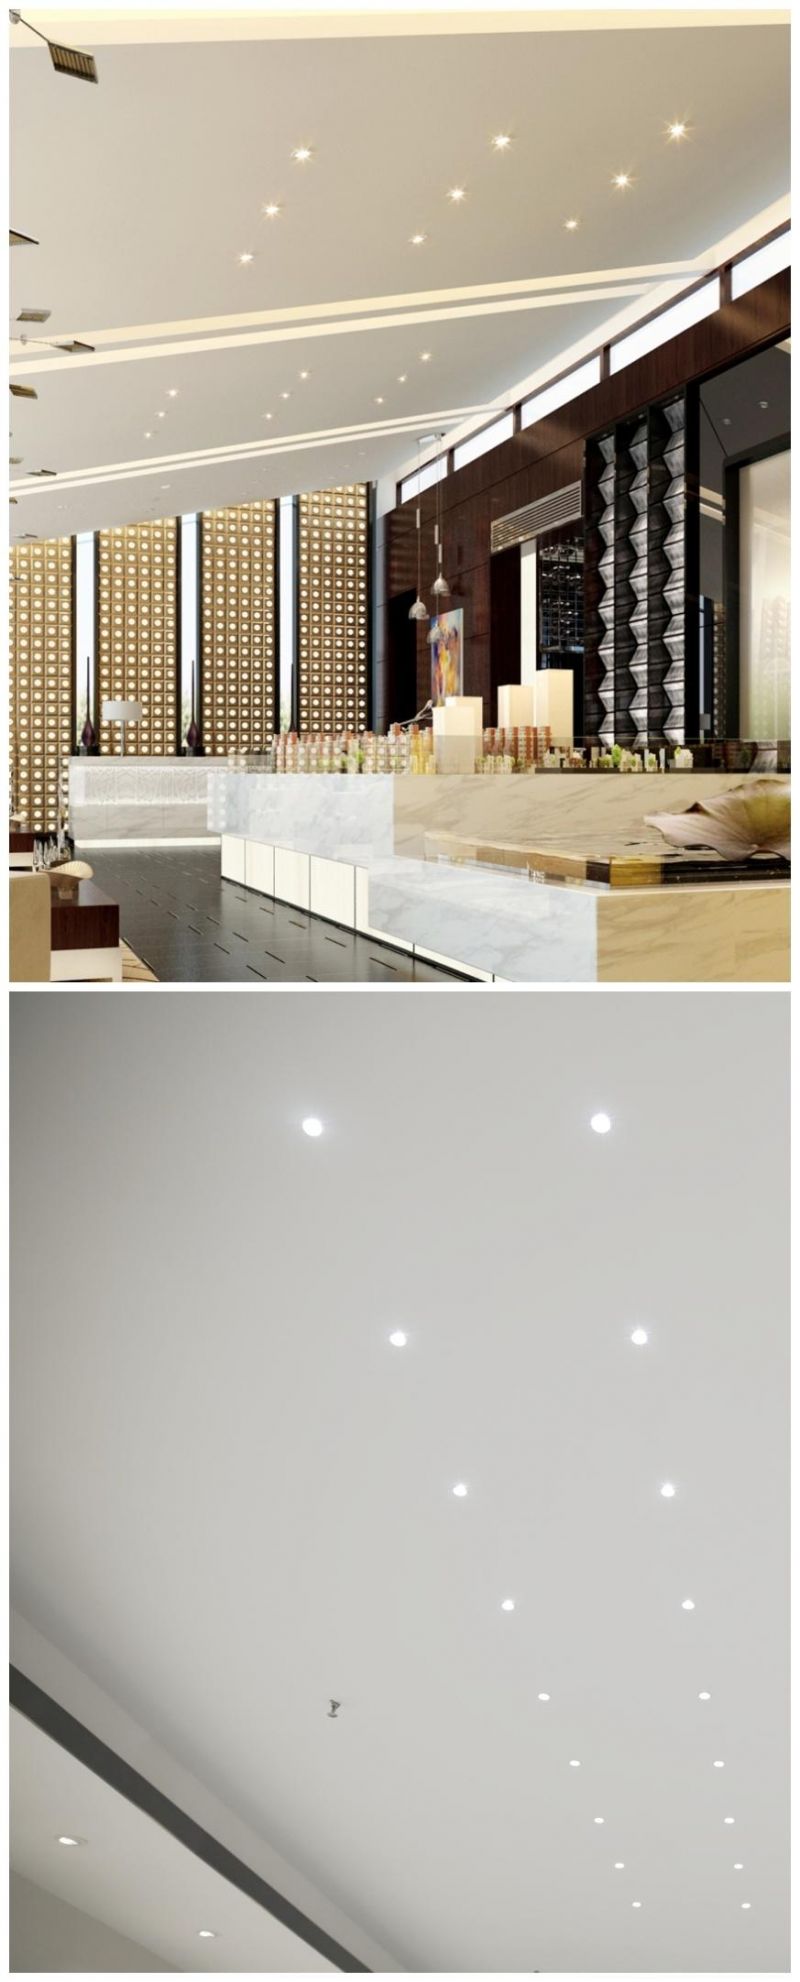 R6855 Small Recessed Down Light Ceiling Light Interior Lighting Fixture LED Lamp